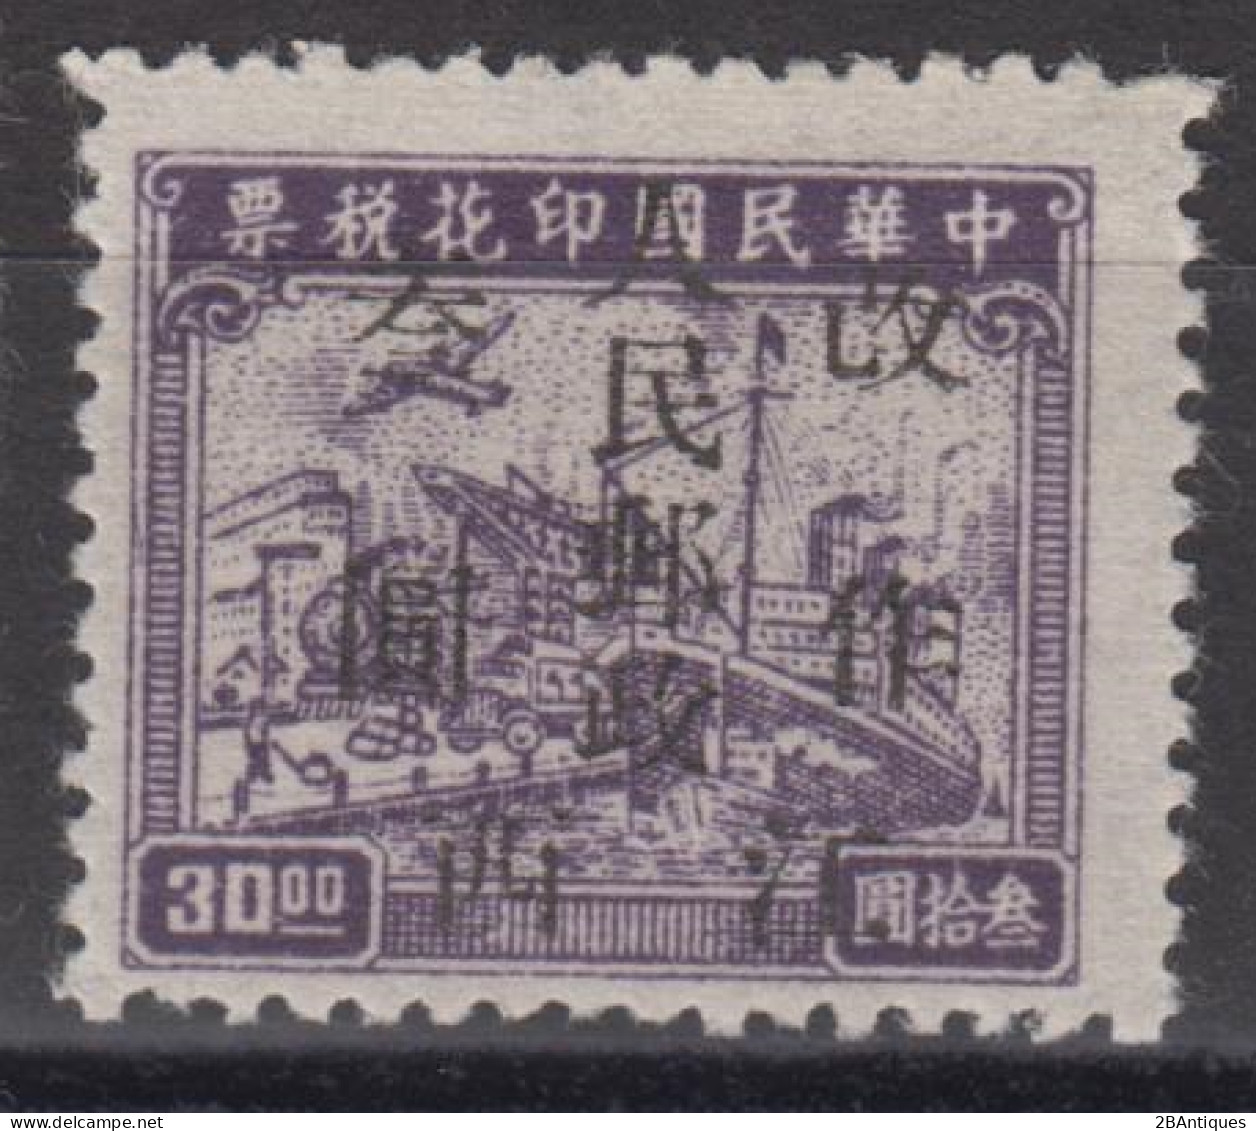 CENTRAL CHINA 1949 - China Empire Postage Stamp Surcharged - Zentralchina 1948-49